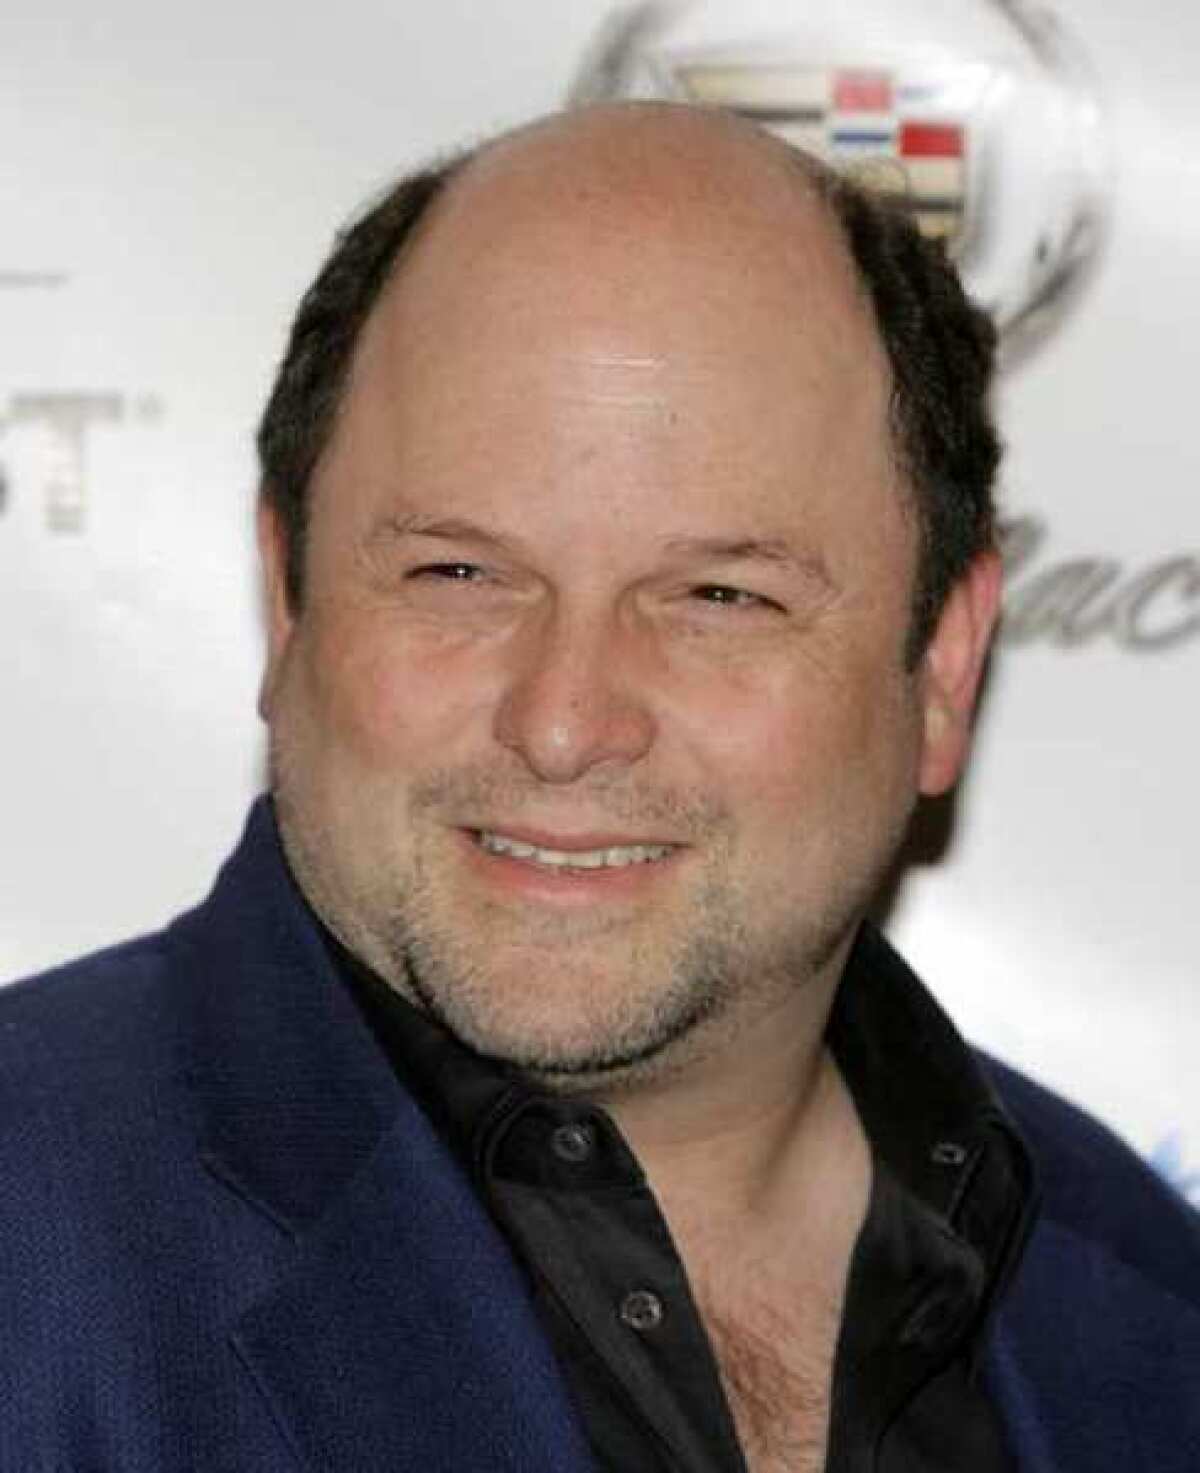 Jason Alexander, like many men, has a bald pate. Scientists are finding out more about why this happens.